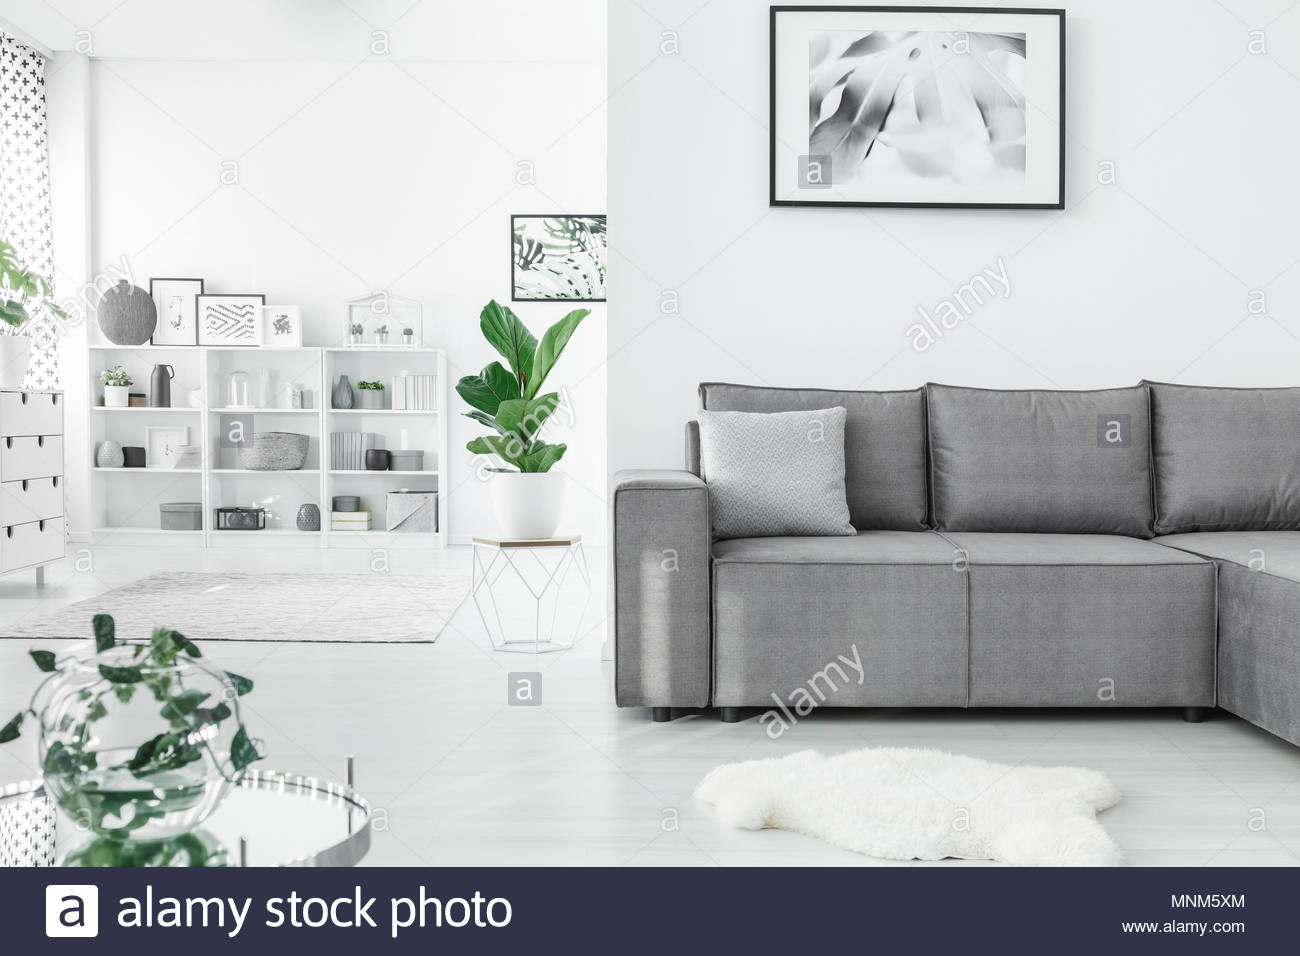 Open Space Living Room Interior With A Grey Corner Sofa Plants